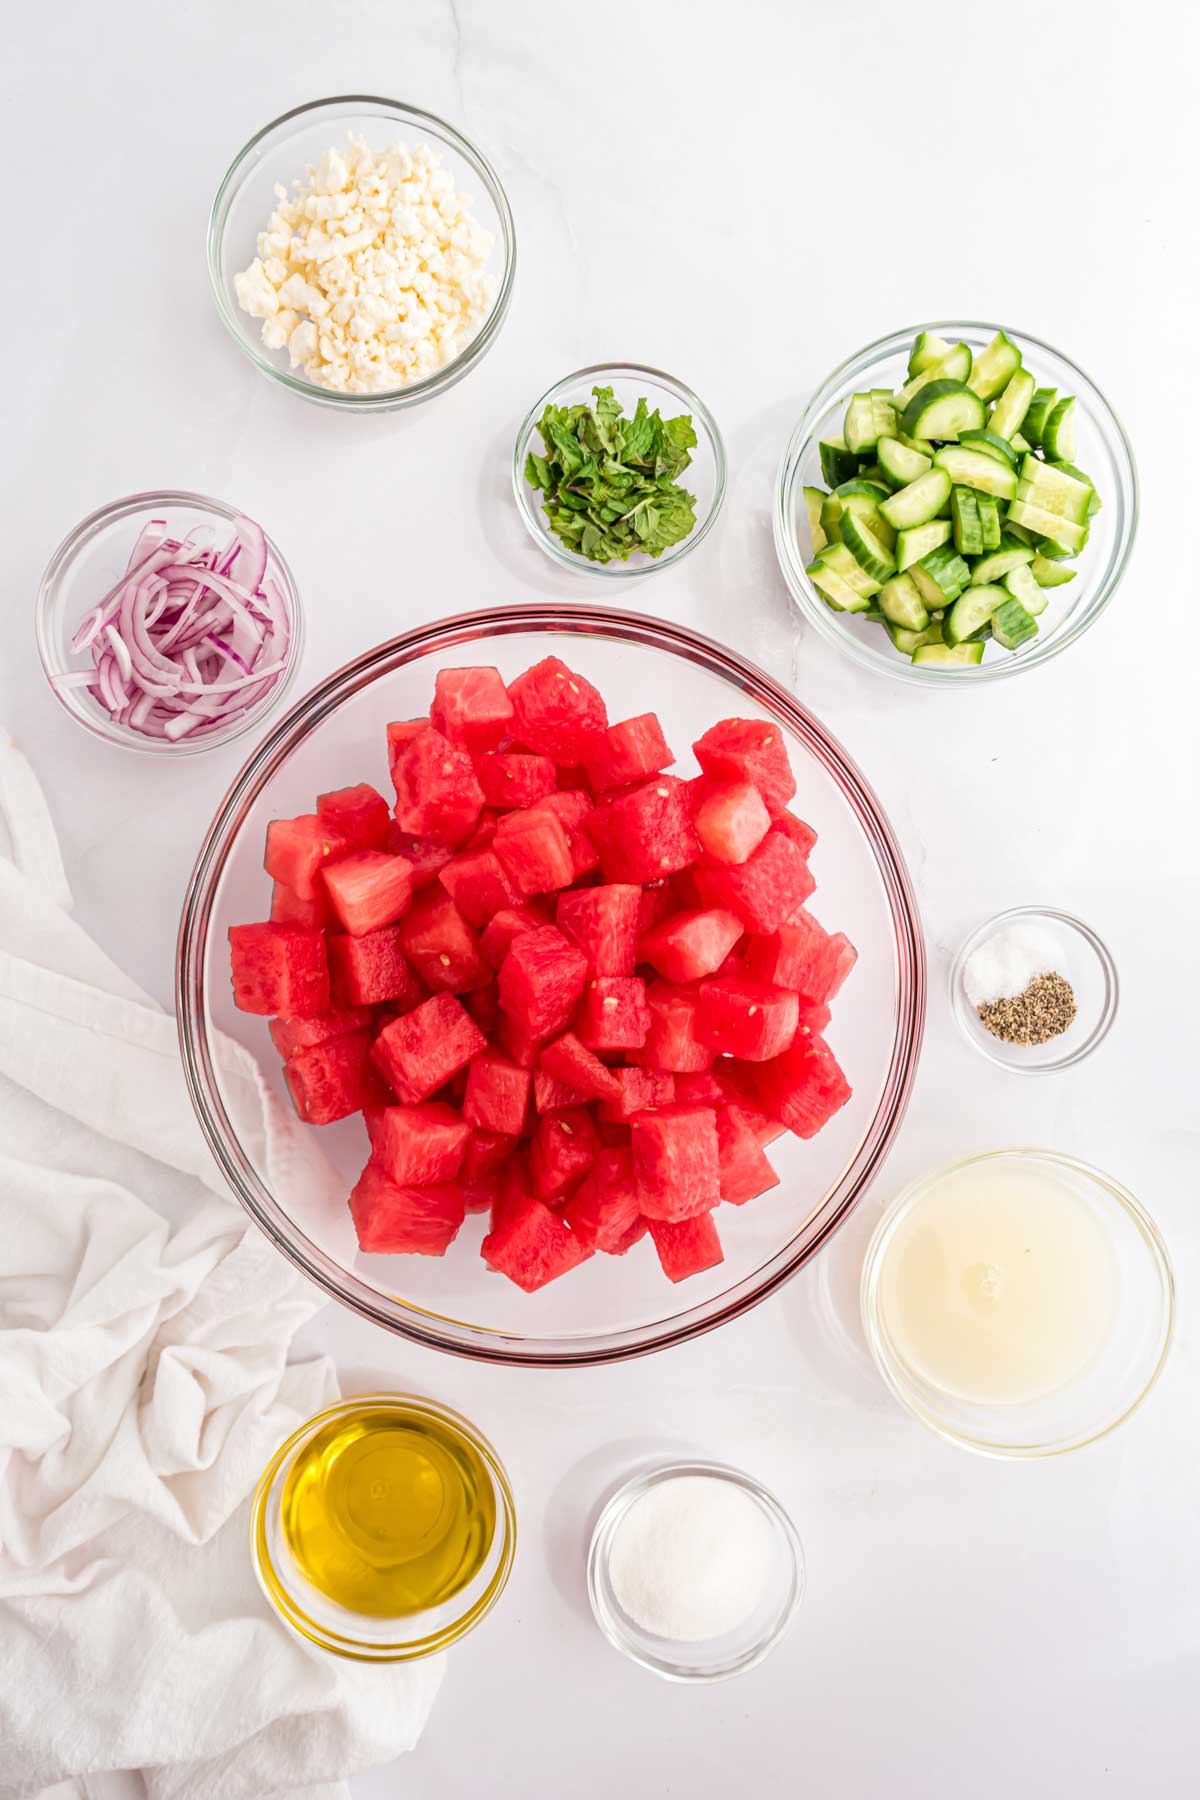 Ingredients to make watermelon feta salad in bowls on the table.